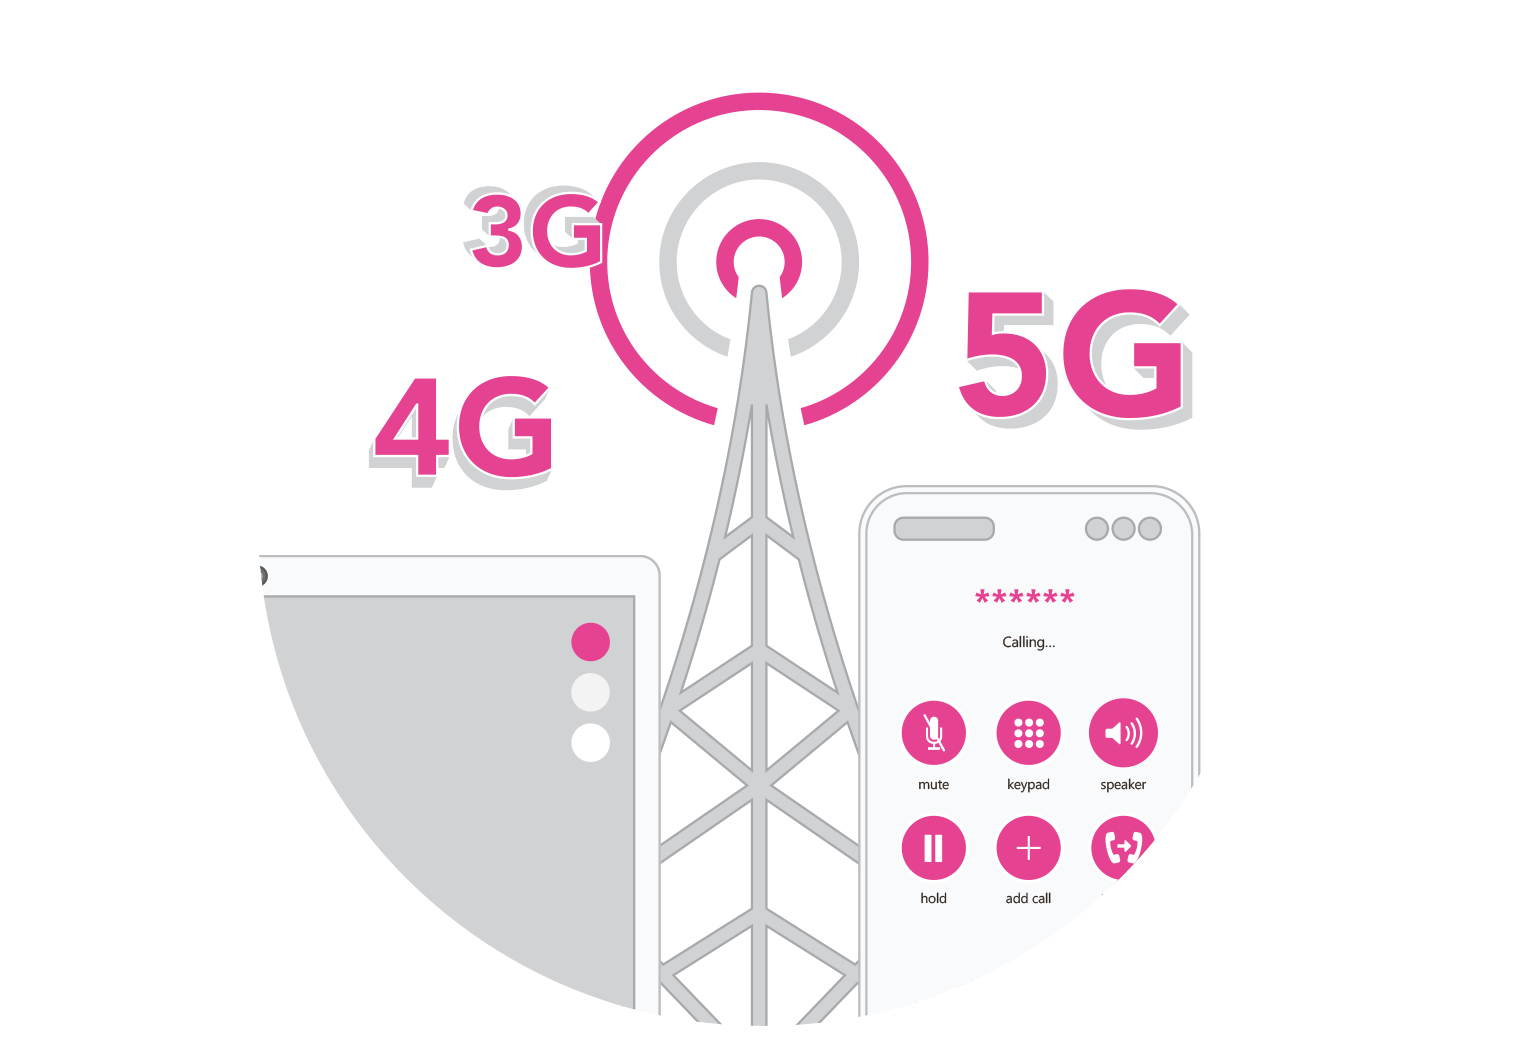 Government Proposed 5G Mast Regulations Change to Allow 30m High Cell Towers